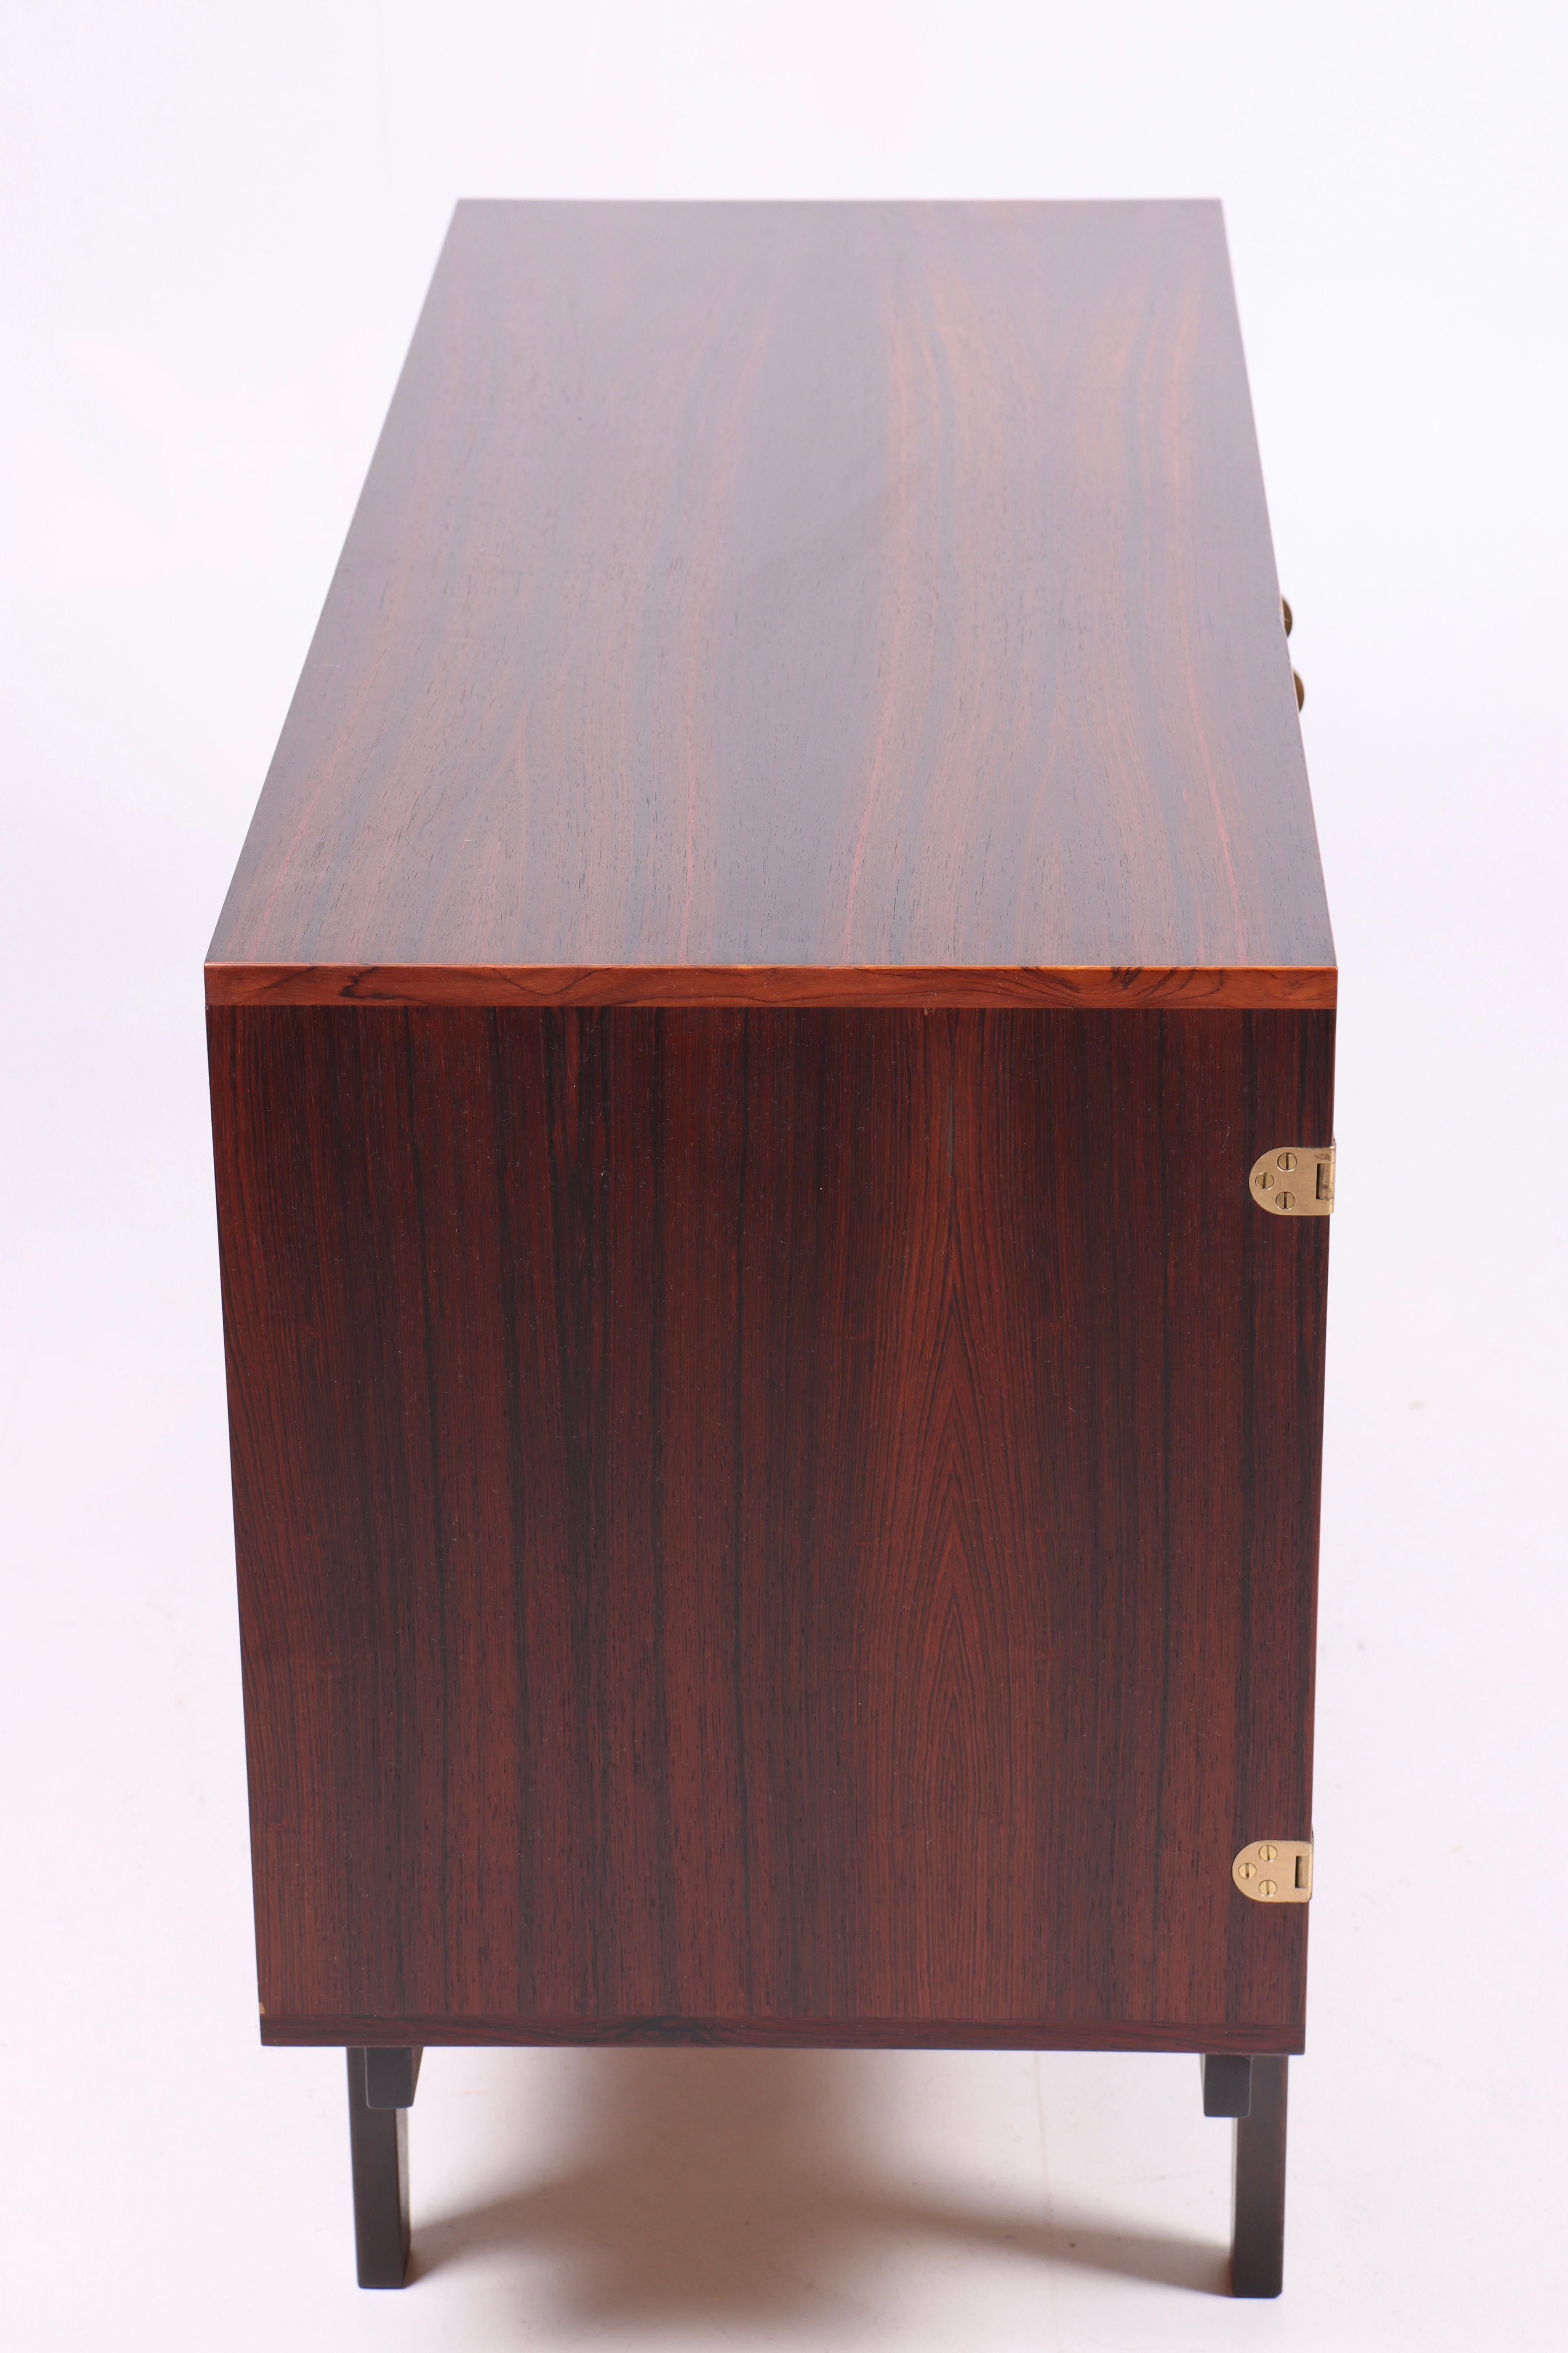 Midcentury Low Cabinet in Rosewood with Brass Hardware by Løgvig, Denmark, 1960s For Sale 2